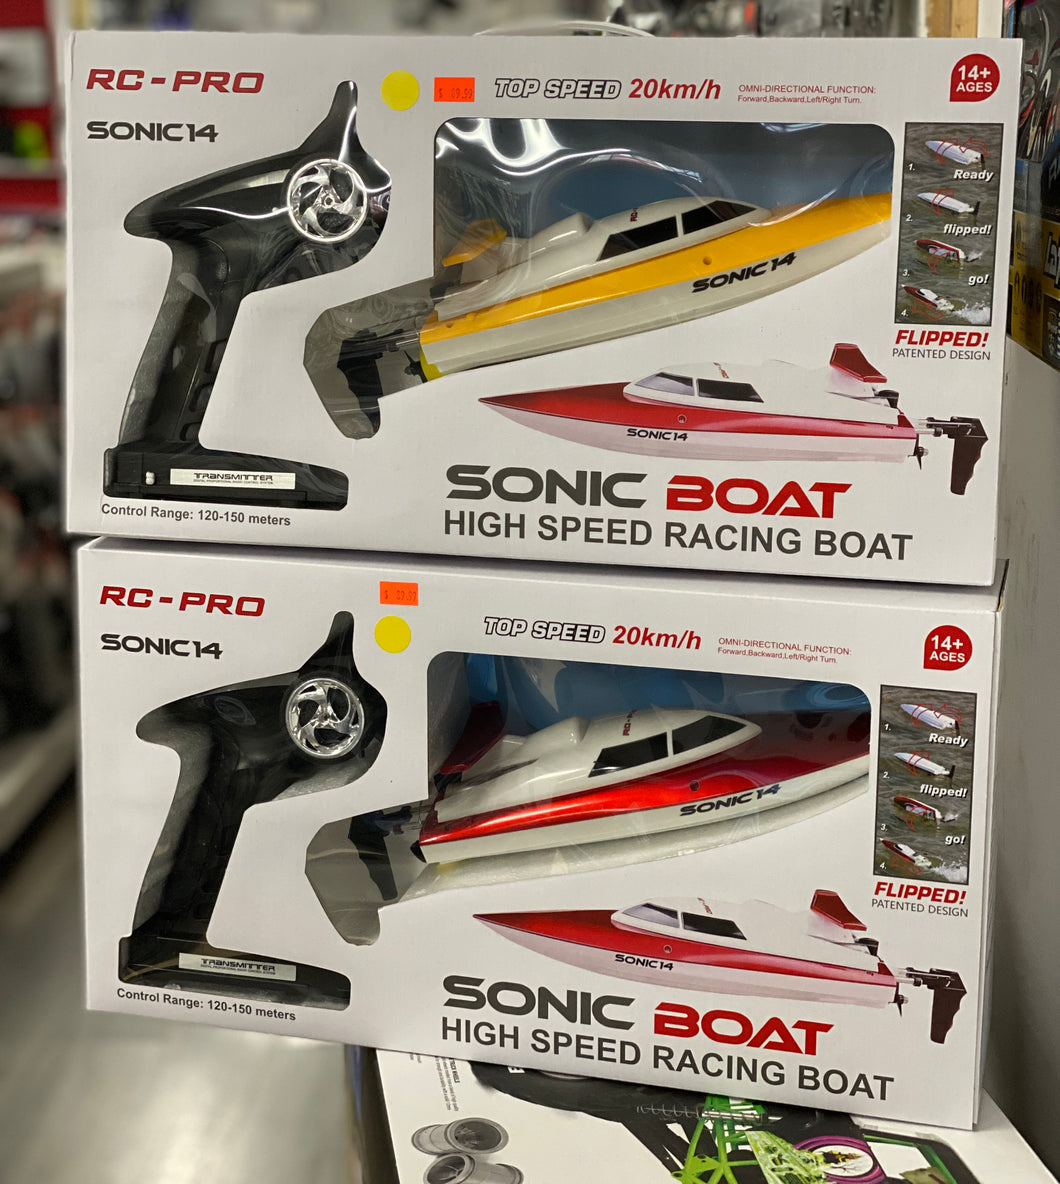 RC-PRO SONIC14 Brushed Boat